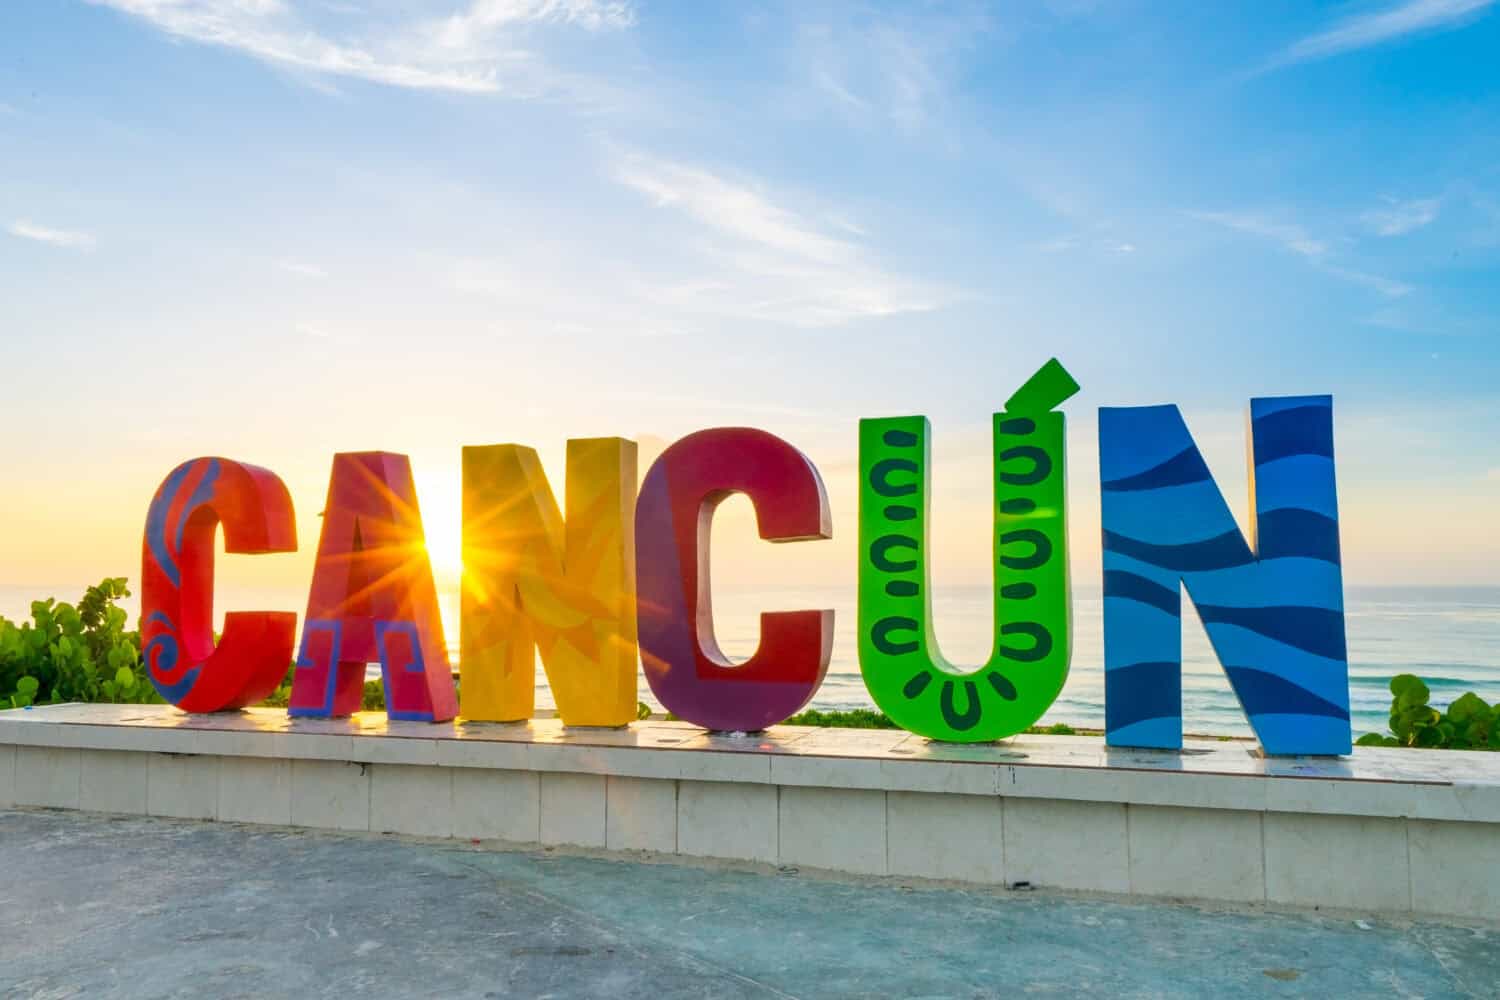 <ul> <li><strong>Sample Cost: </strong>$0 – $2.50 (Mayan Ruins)</li> </ul> <p>Looking at things to do in Cancun on a budget or otherwise is very much dependent on how far you want to venture away from your hotel. There's no question you can spend your entire trip just at your hotel and get all of the relaxation you want. However, if you want to see some of the sites, venture to the "Cancun Spot" to make sure you get your Instagram hashtagging on. Located in Playa Defines, this spot is completely free. Just expect long lines.</p> <p>If you want to see more of the sites, head to the El Rey Archeological Zone to see Mayan ruins. It's a short bus ride over and only costs around $2.50 to get to. Once inside, there are more than 45 different stone structures that make up the entire site. It's incredible to see and learn about such a prominent and ancient civilization.</p> <p>Agree with this? Hit the Thumbs Up button above. Disagree? Let us know in the comments with what you'd change.</p>